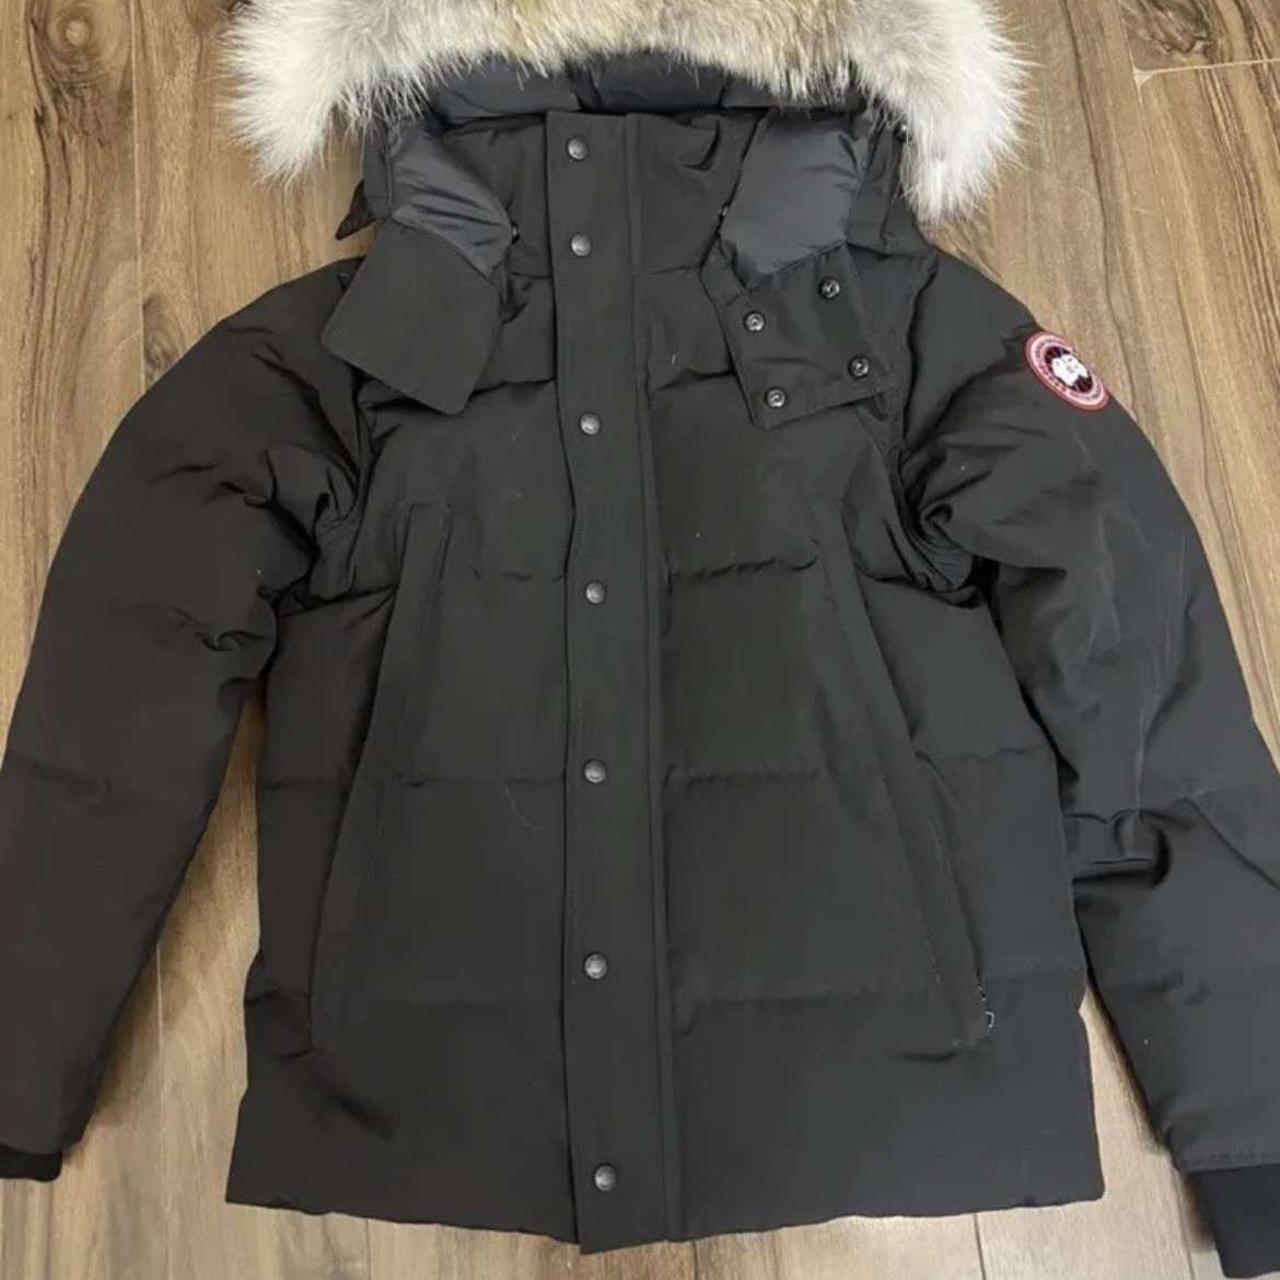 Canada goose 2 available - Depop